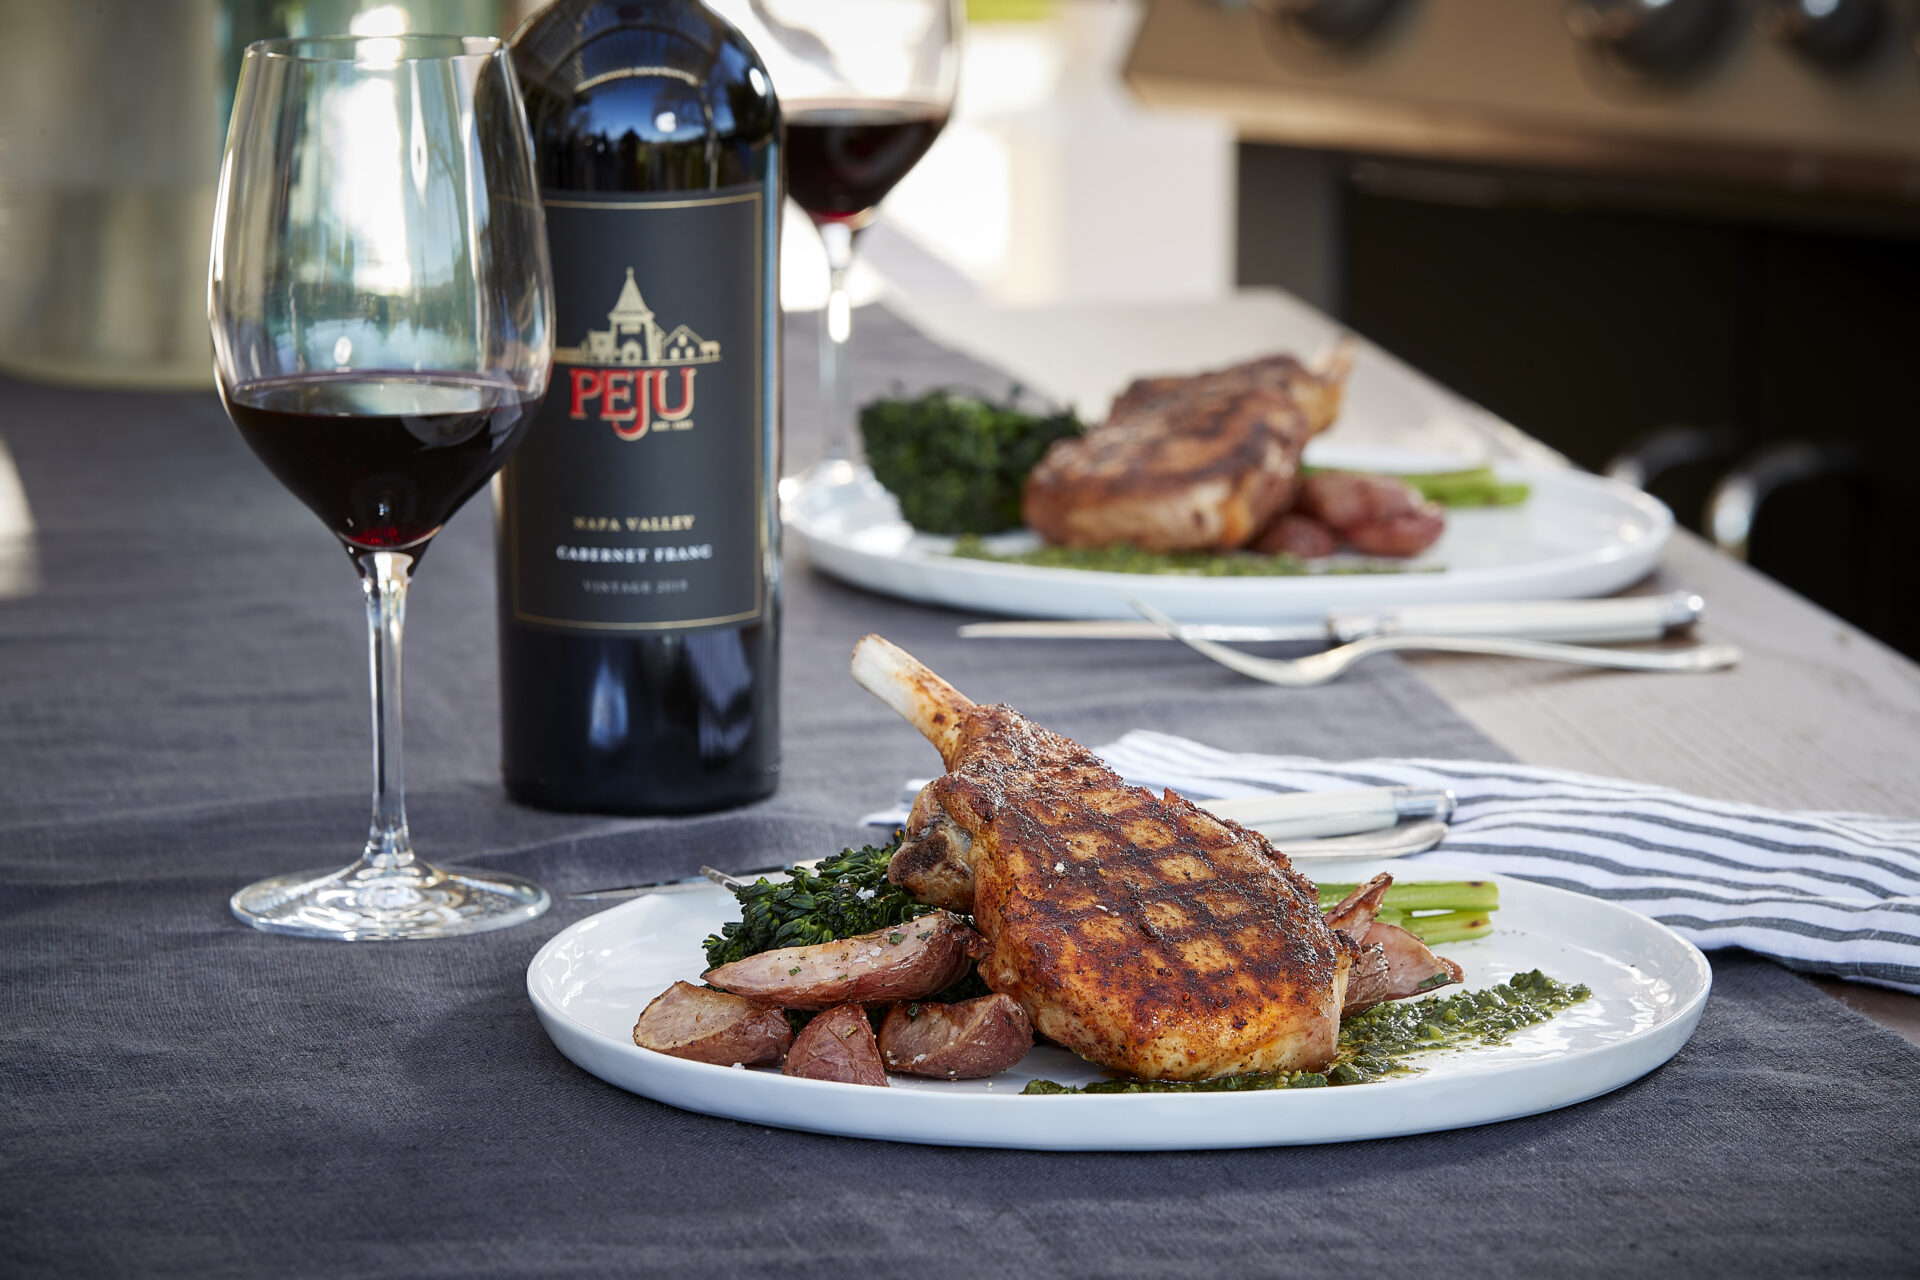 Peju Winery's BBQ duo bottle and glass with a porkchop and sides on a plate